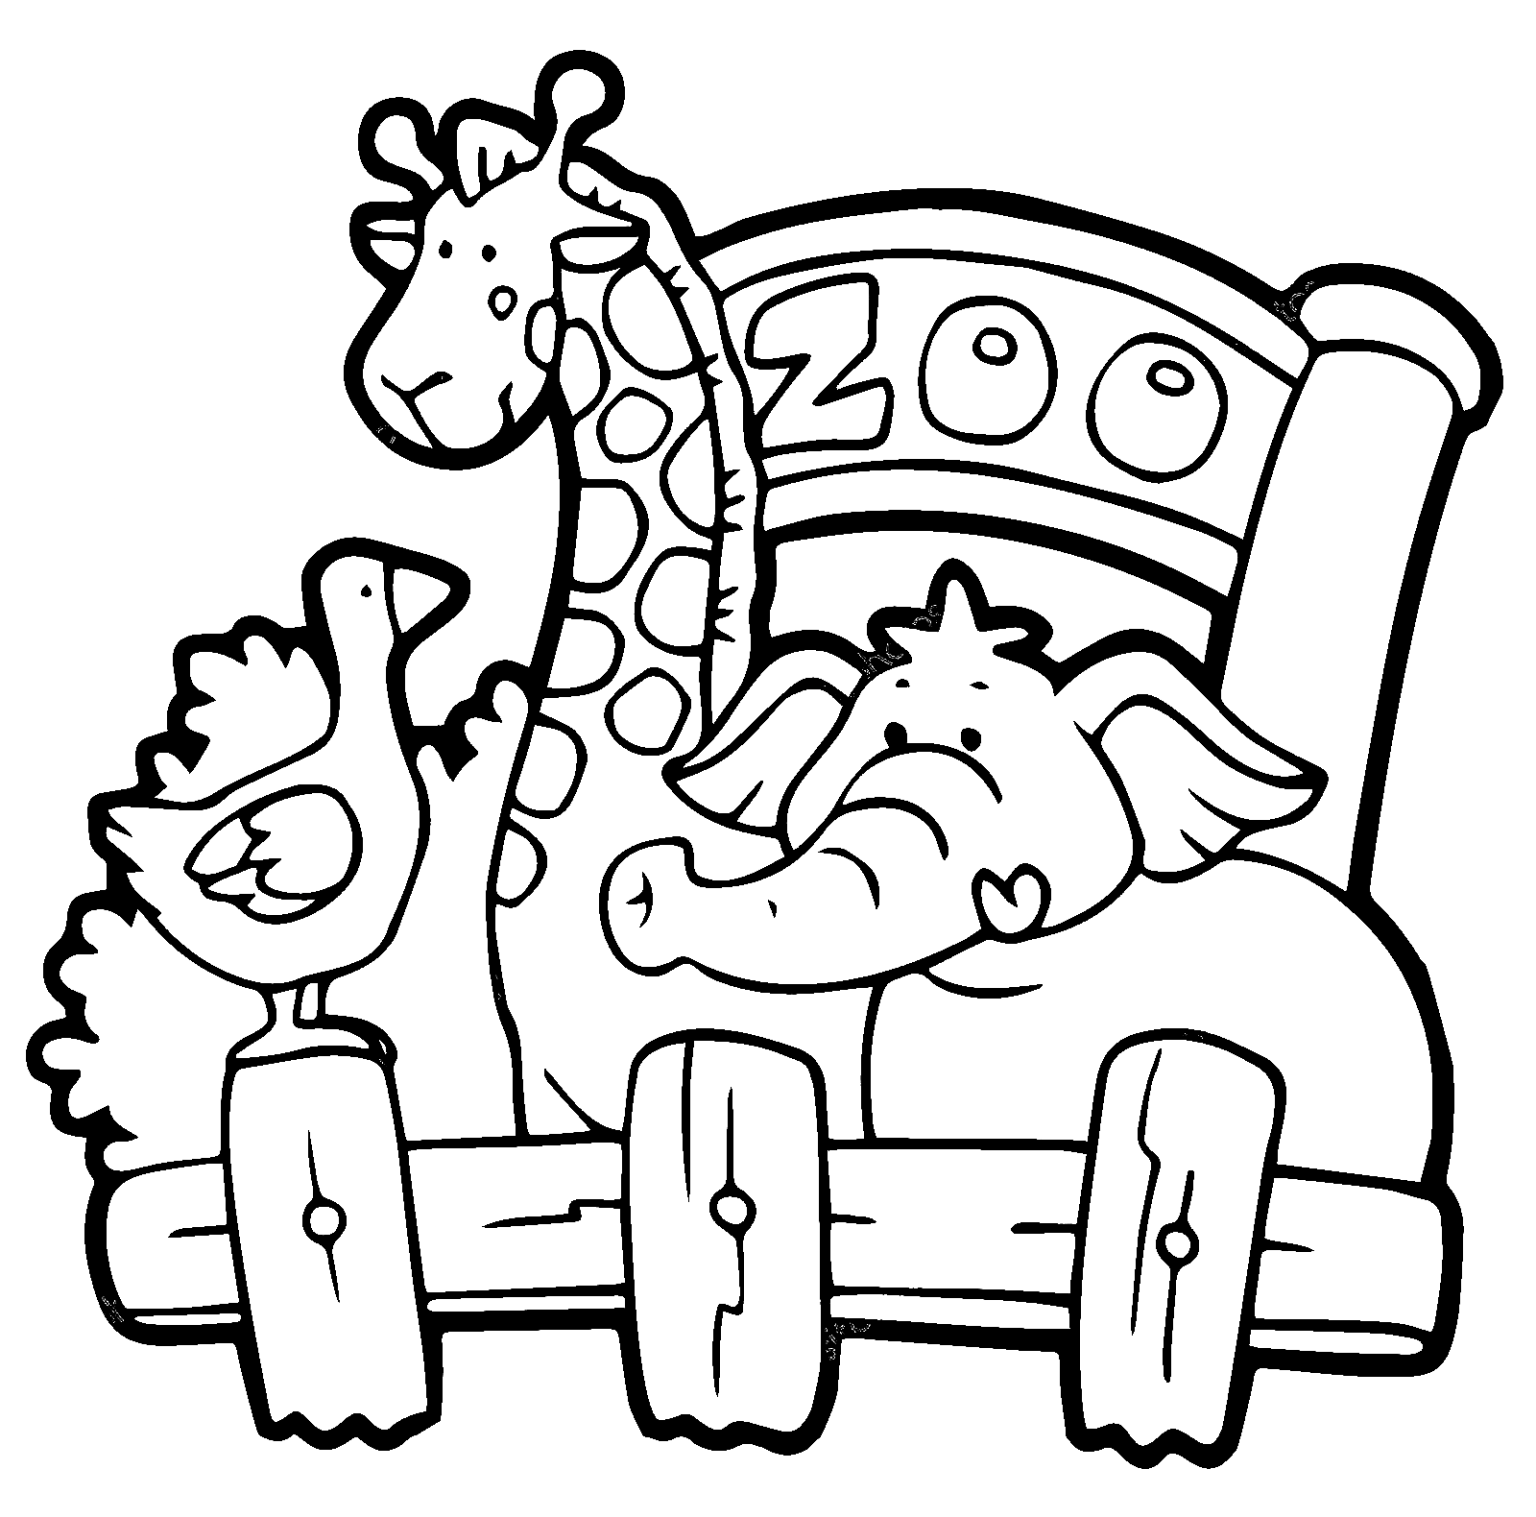 20-free-printable-zoo-coloring-pages-everfreecoloring